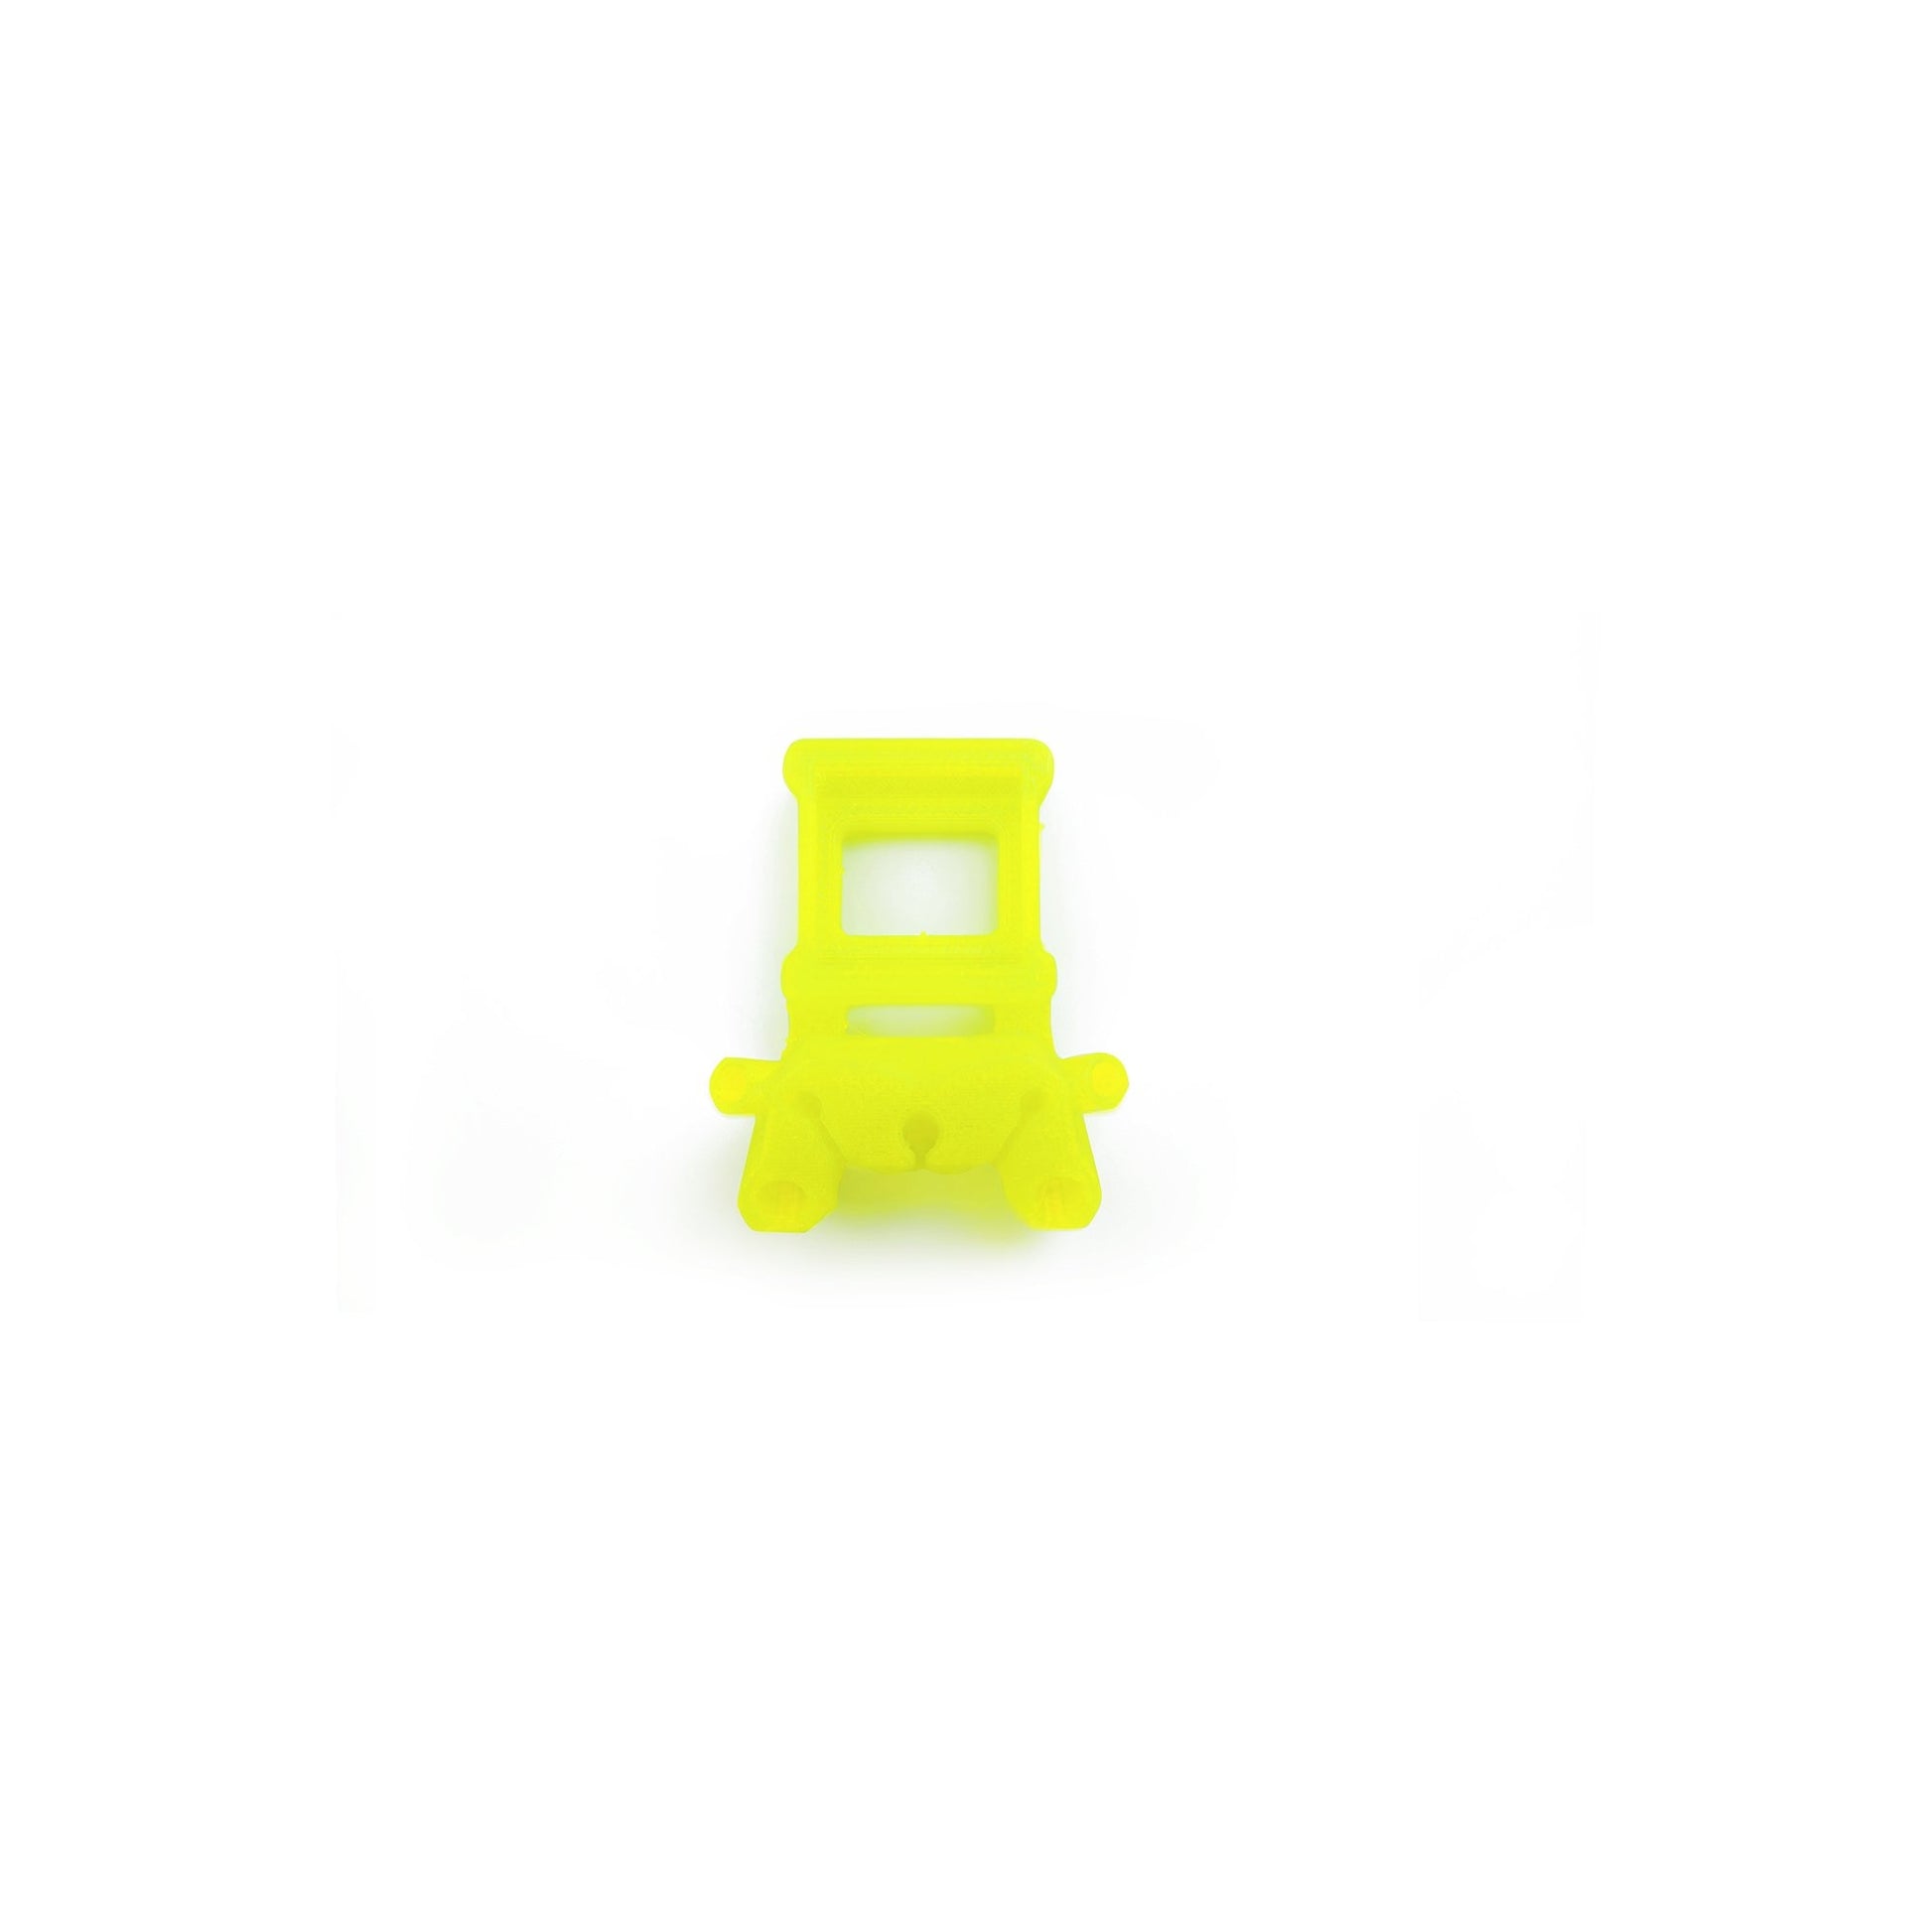 GEPRC GEP-MK5 GPS Holder 3DFrame Parts - Suitable for Mark5 O3 Series Drone DIY RC FPV Quadcopter Replacement Accessories Parts